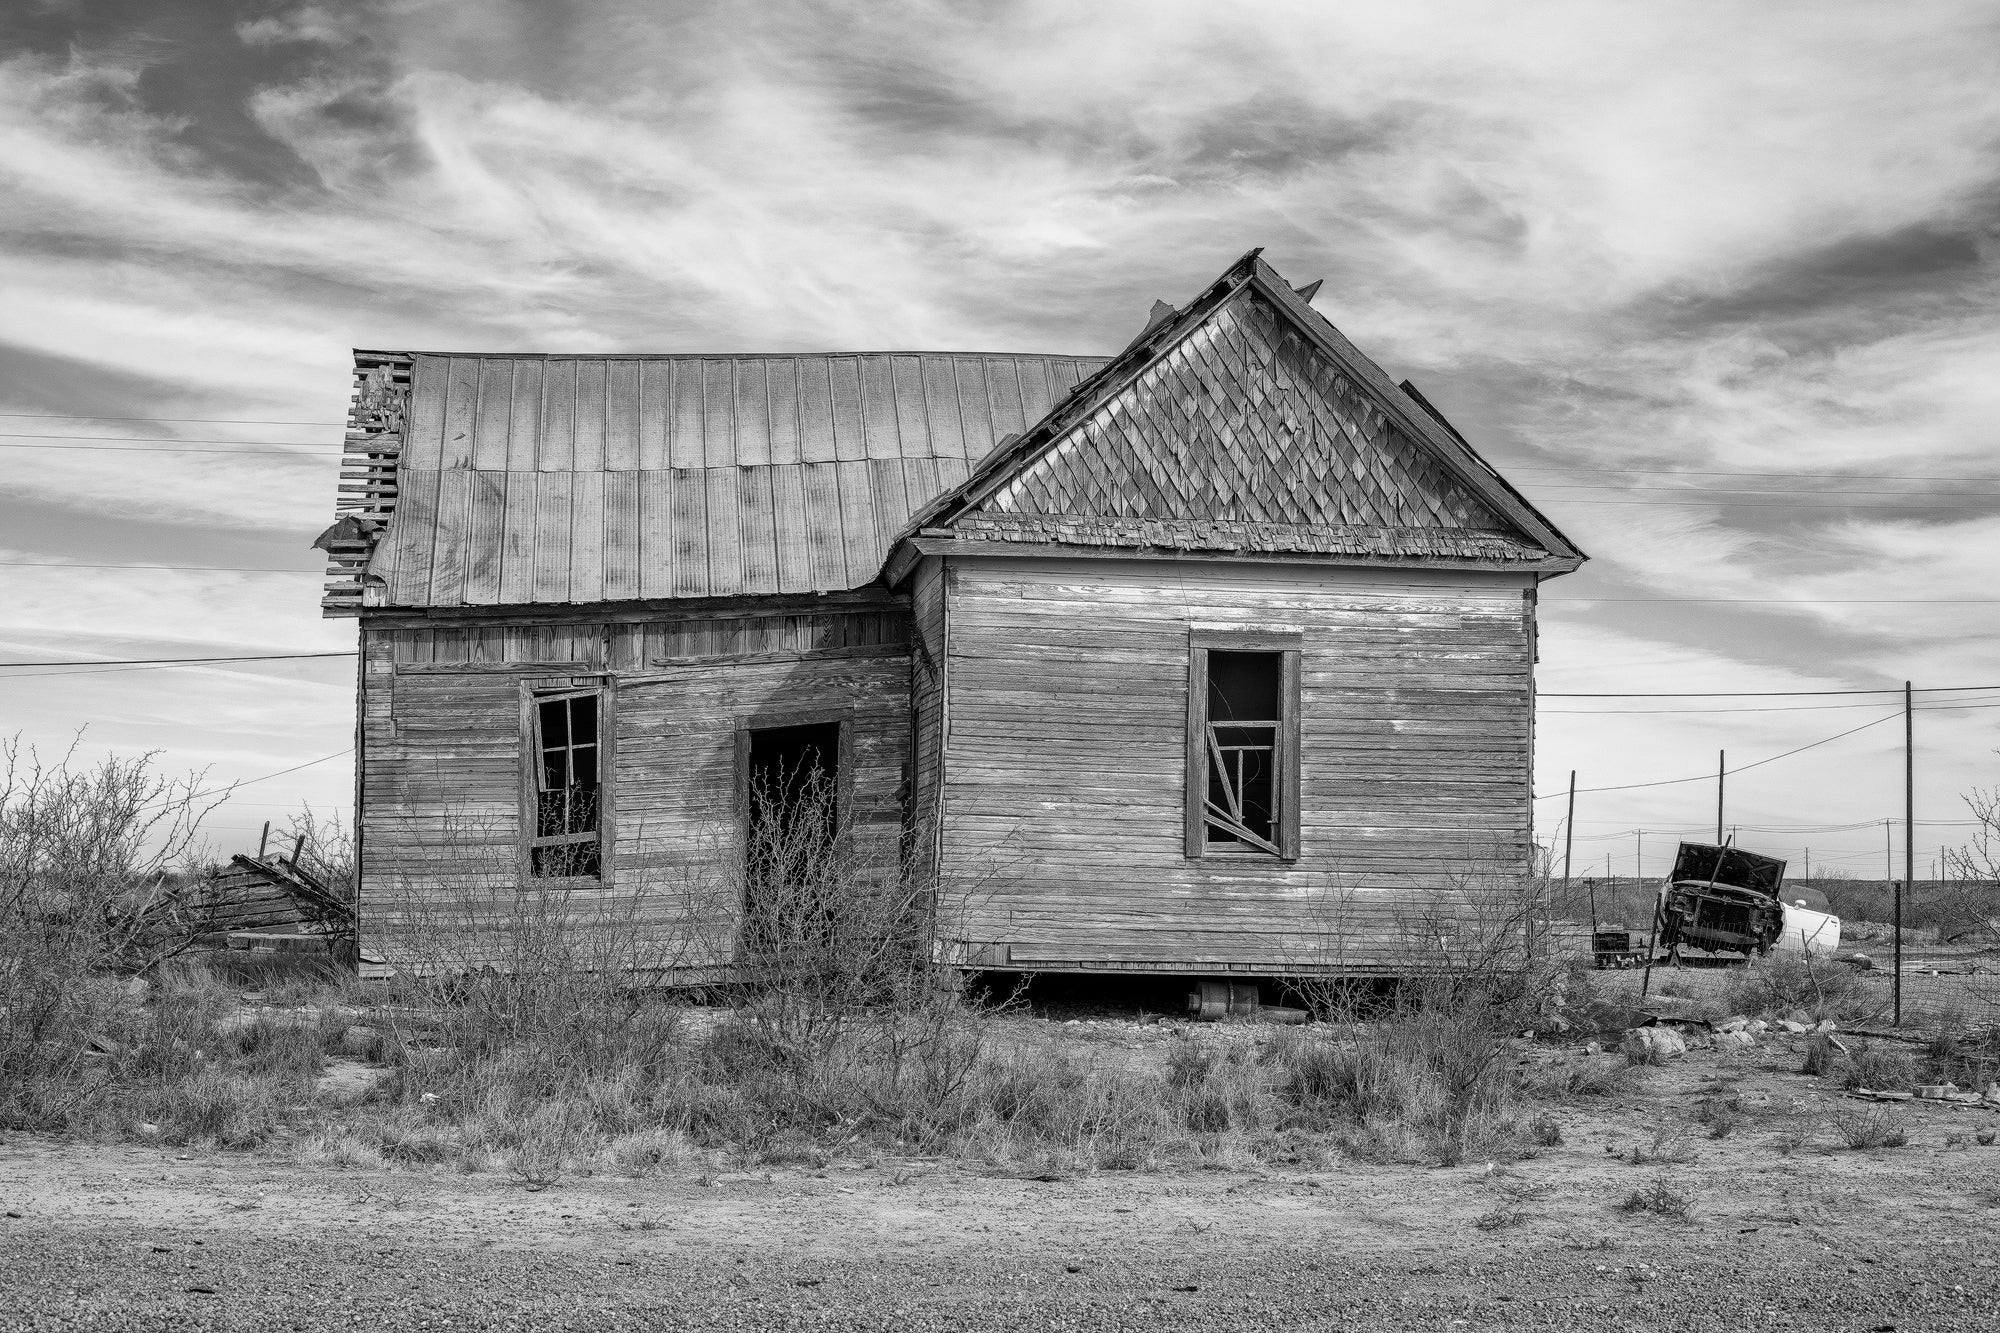 Abandoned House in a Small Town. Black and White Photograph by Keith Dotson